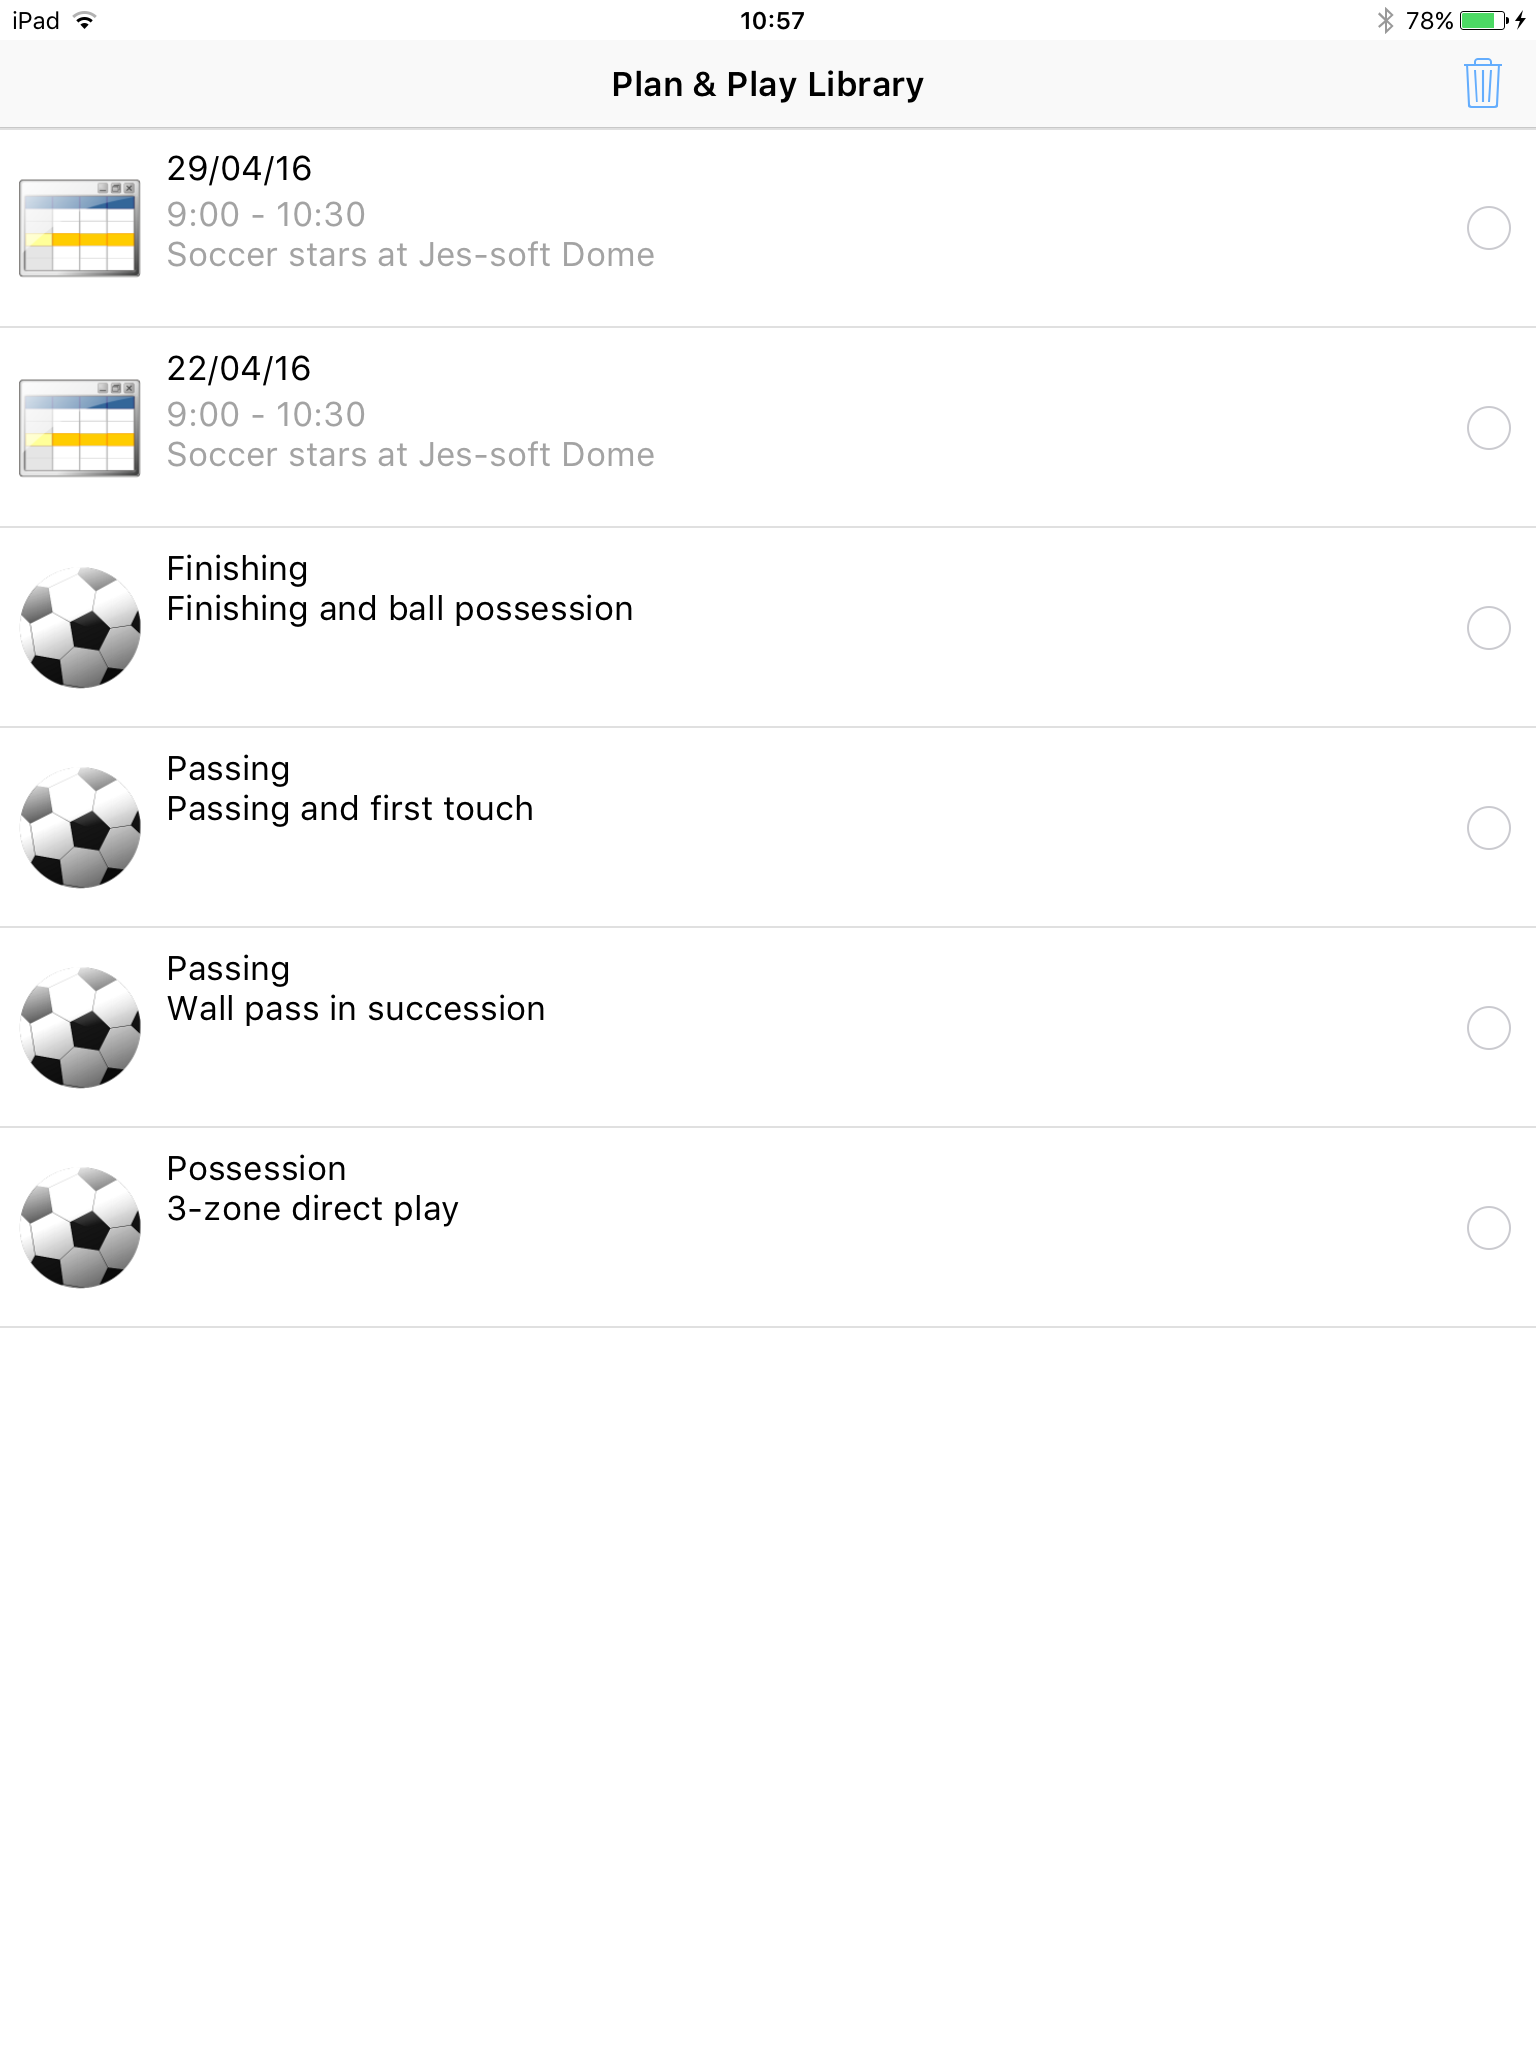 Soccer playview library list